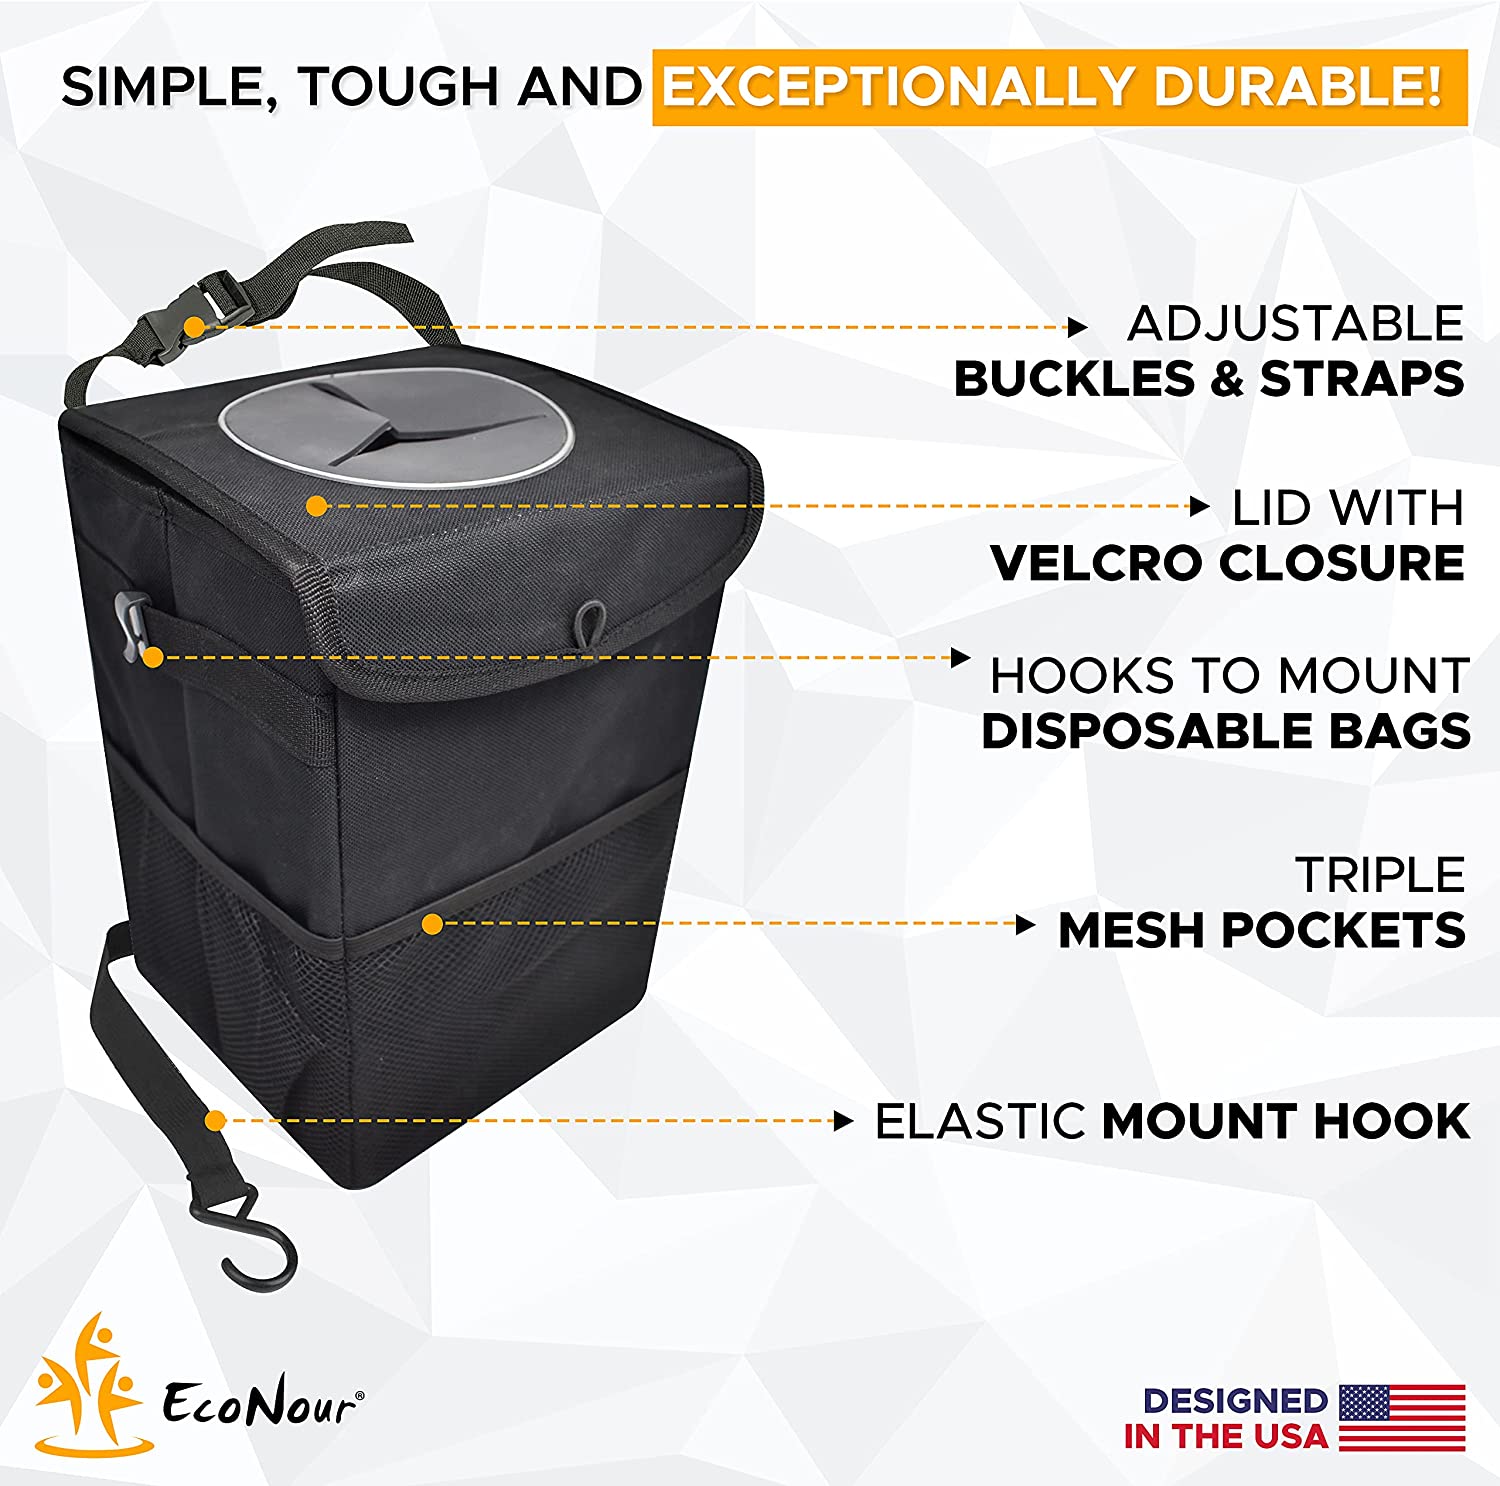 EcoNour Car Trash Bag Foldable Trash Bag for Car with Storage Pockets Waterproof  Auto Litter Bag Multifunctional and Collapsible Car Garbage Bag  Portable and Compact Car Garbage Holder